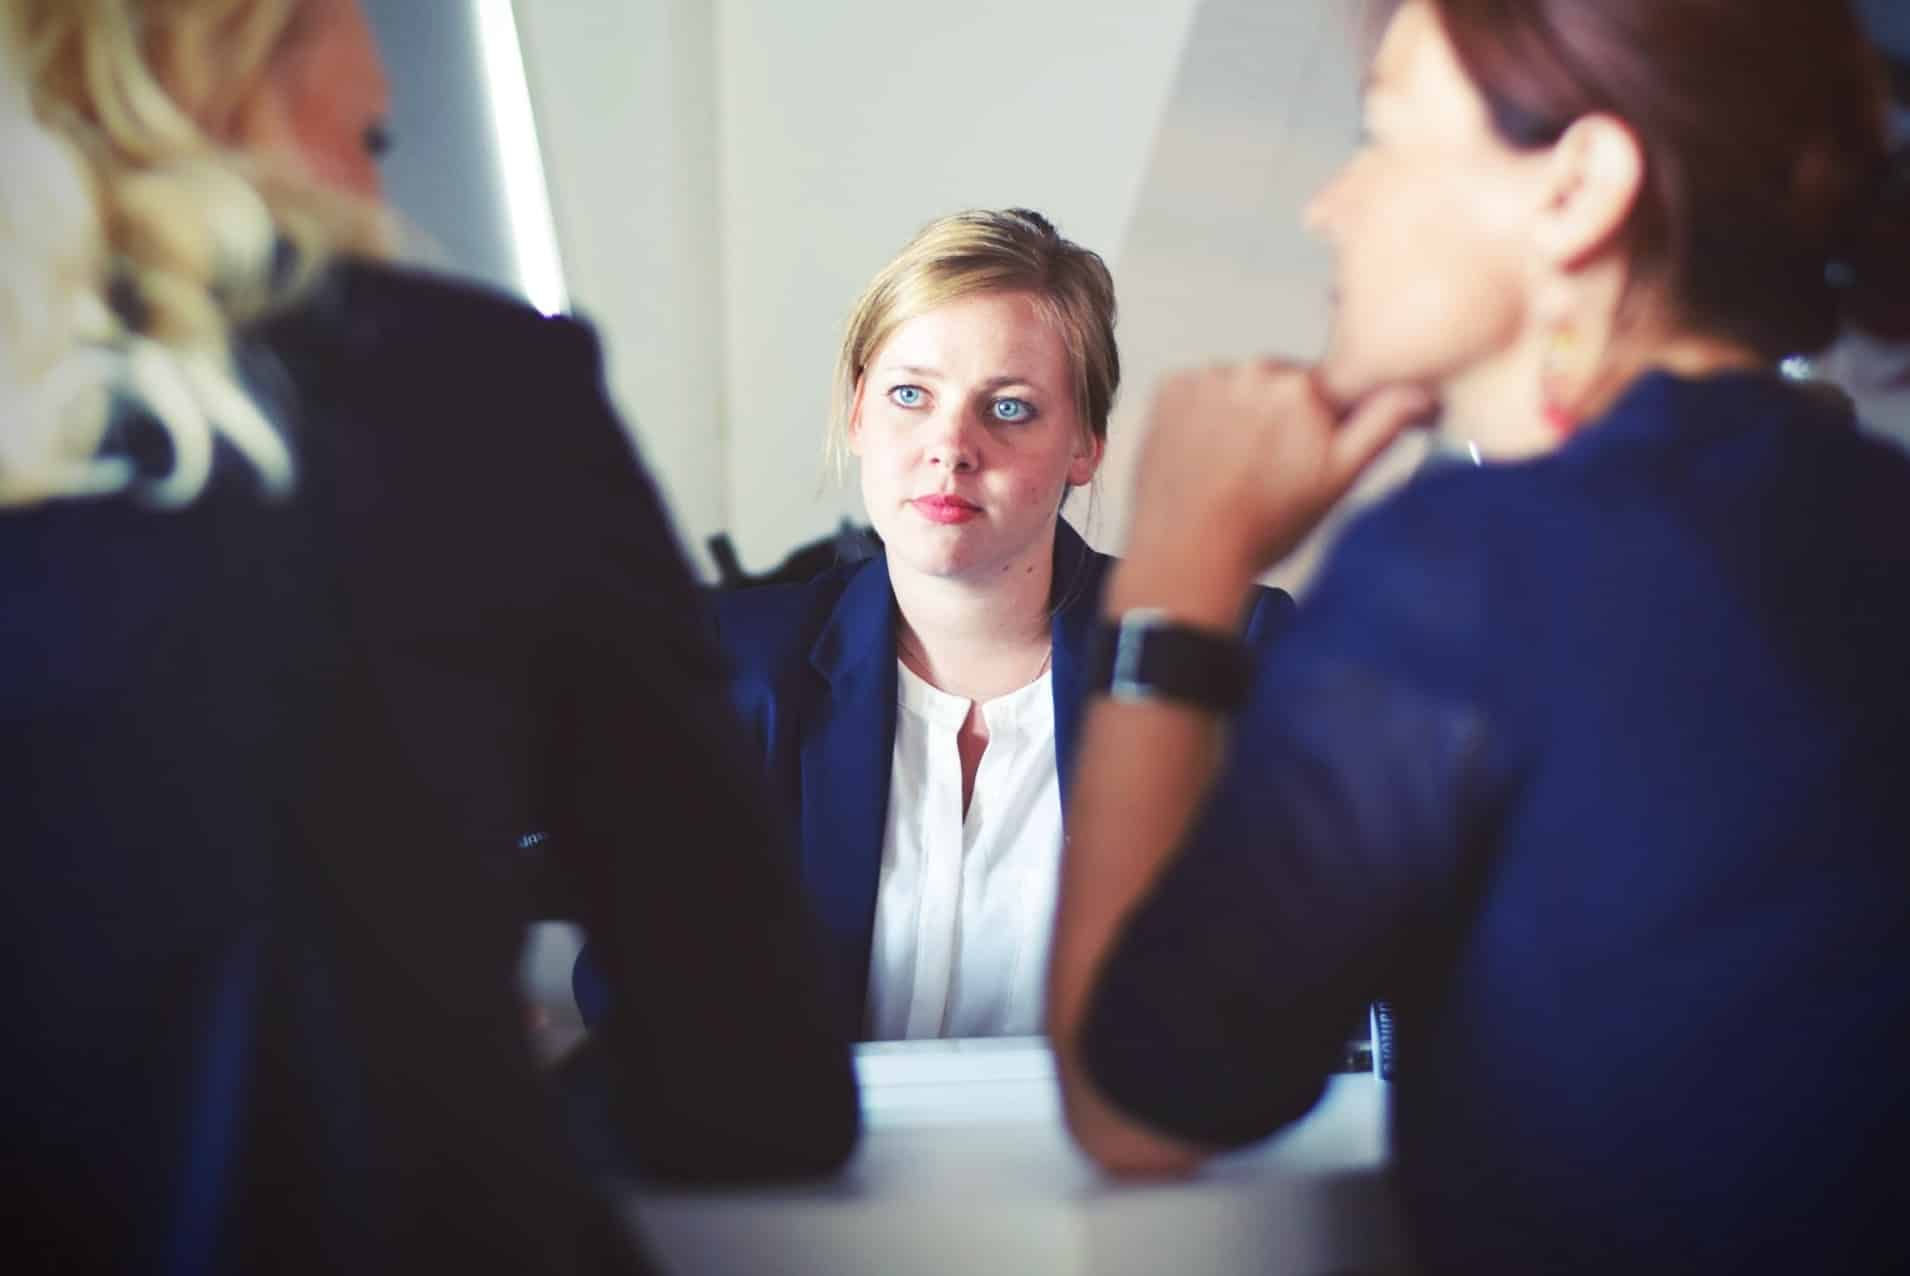 A blond female professional sits in a meeting facing two other women.